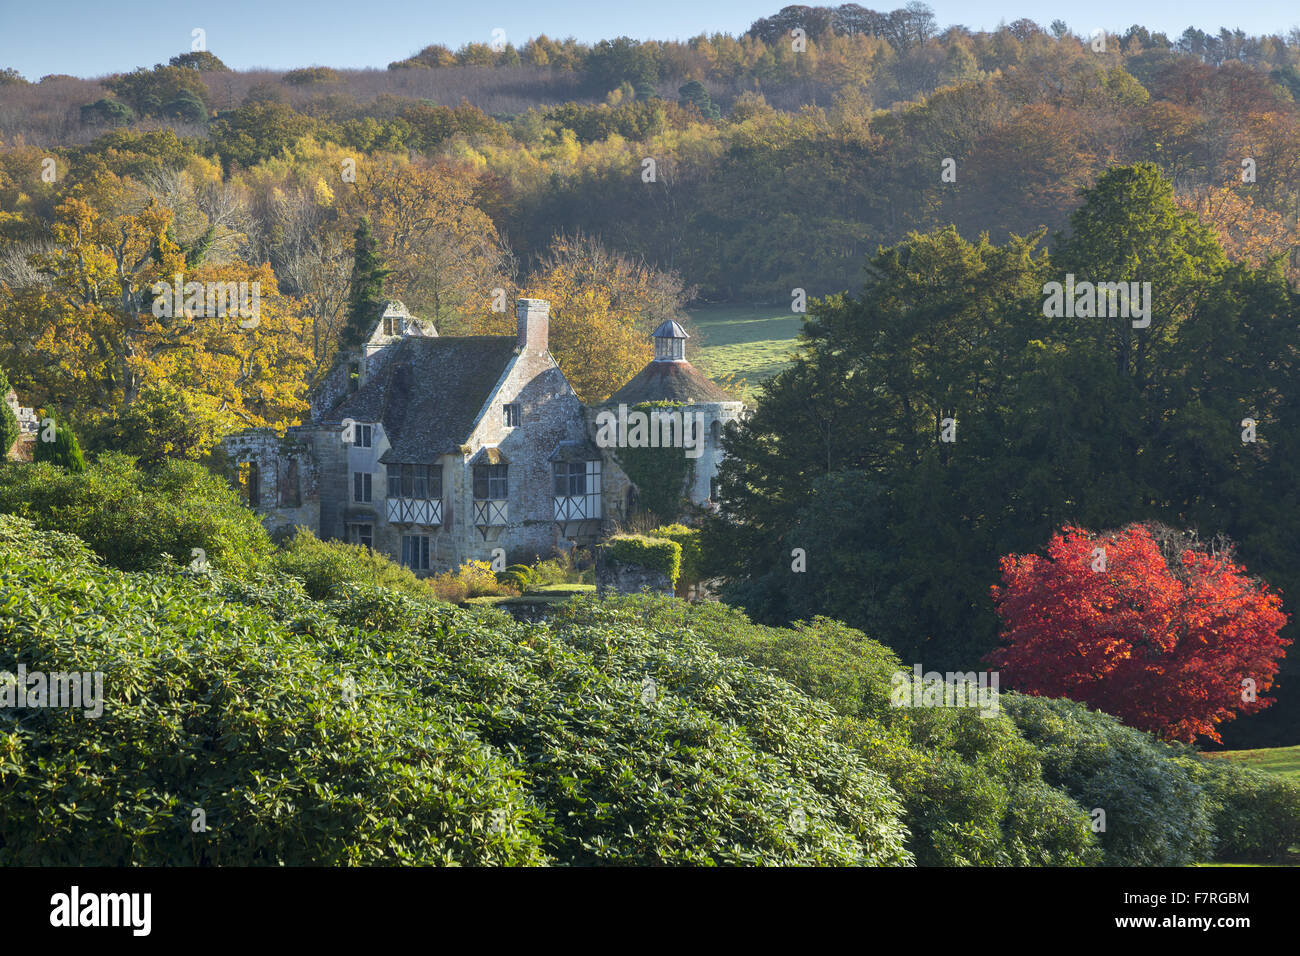 The autumn at Scotney Castle, Kent. The medieval moated Old Scotney Castle lies in a peaceful wooded valley. A Victorian mansion also sits within the estate. Stock Photo